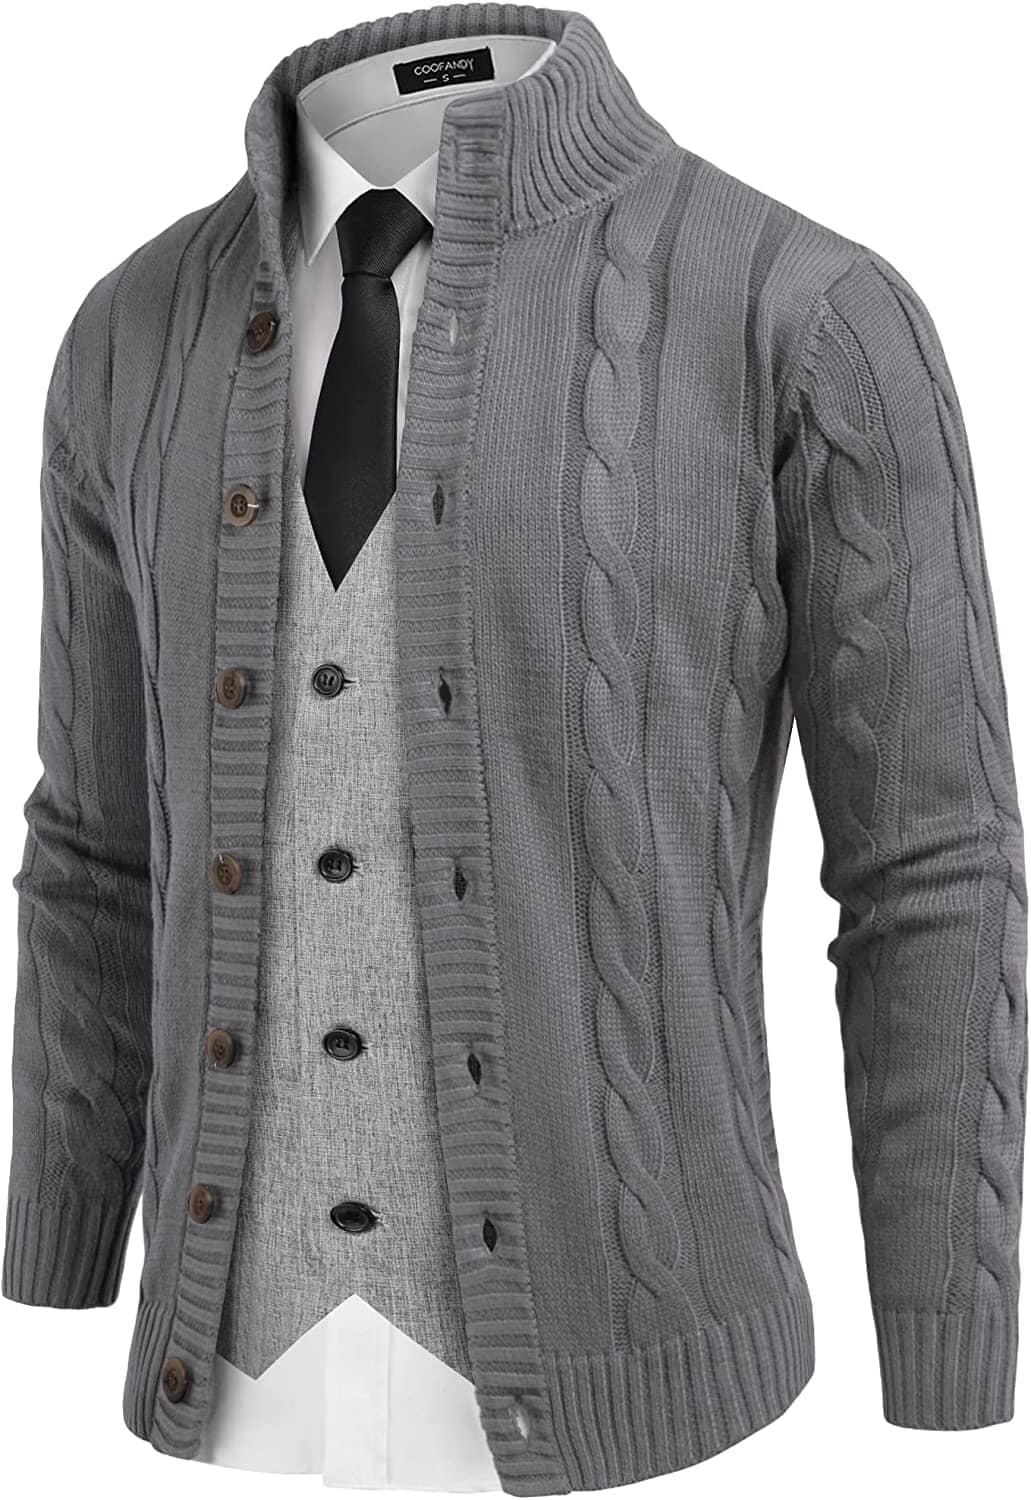 Coofandy Cardigan Cable Knitted Button Down Sweater (US Only) Sweaters COOFANDY Store Grey S 